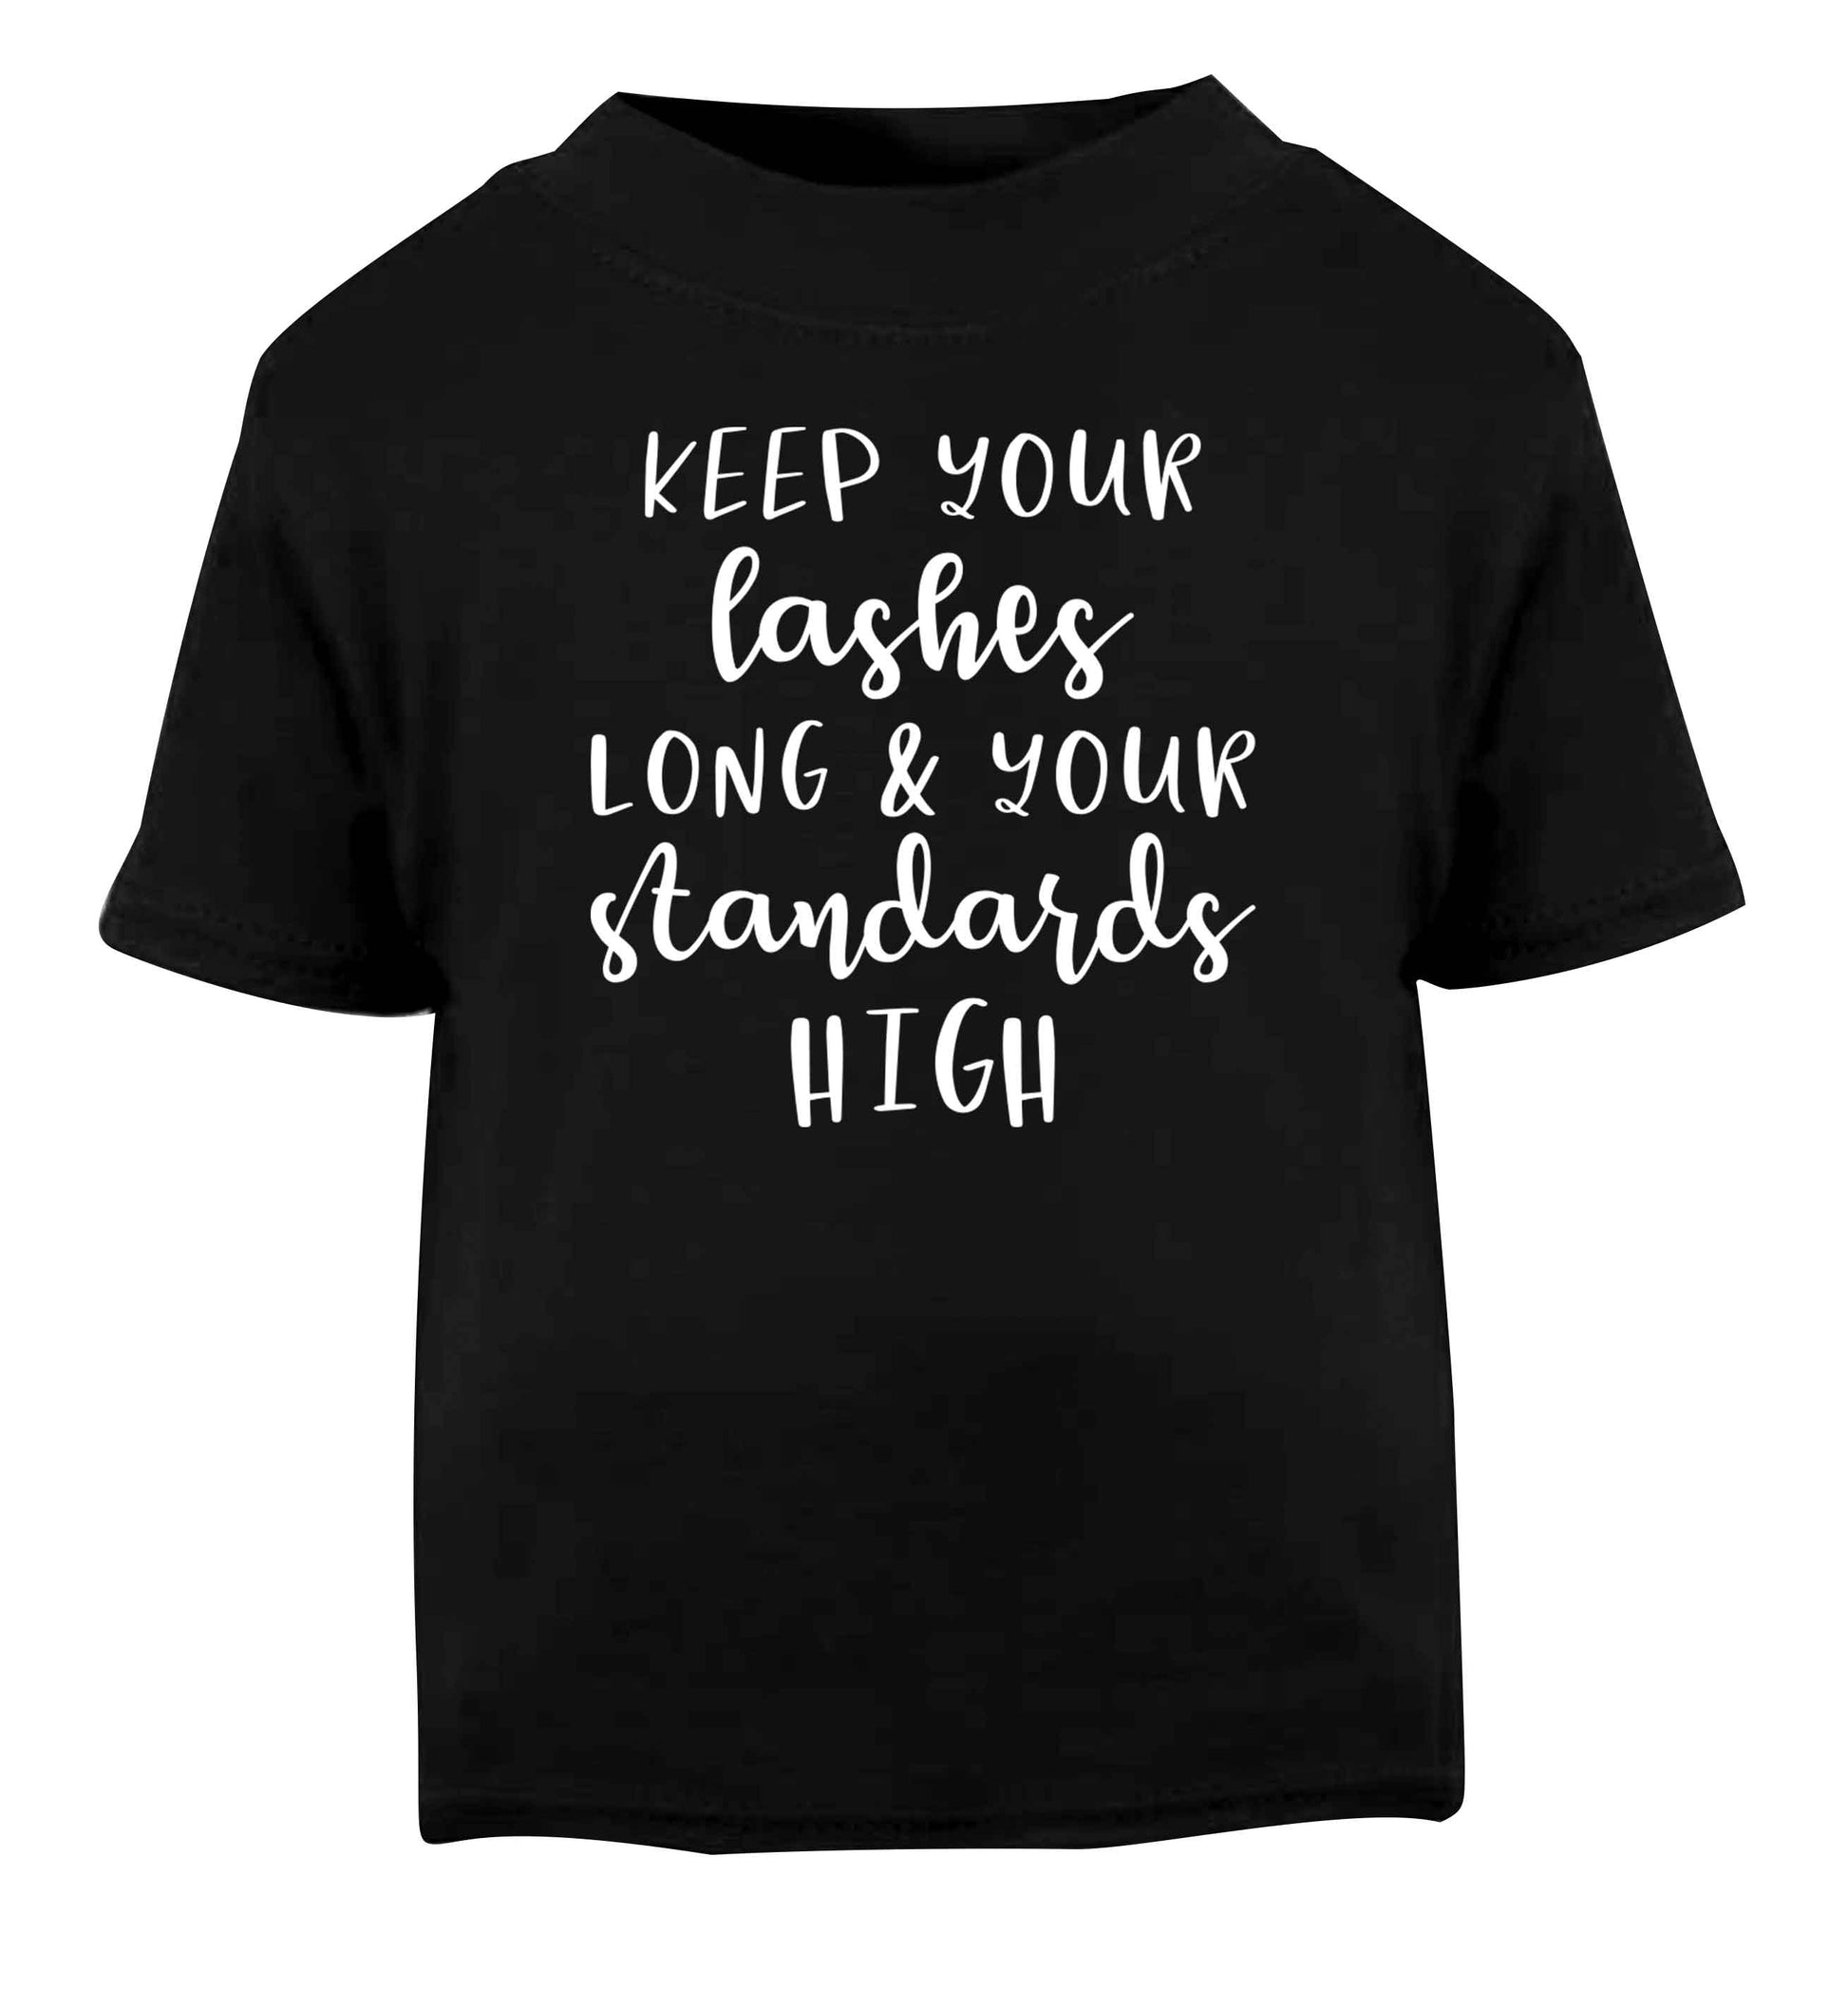 Keep your lashes long and your standards high Black Baby Toddler Tshirt 2 years